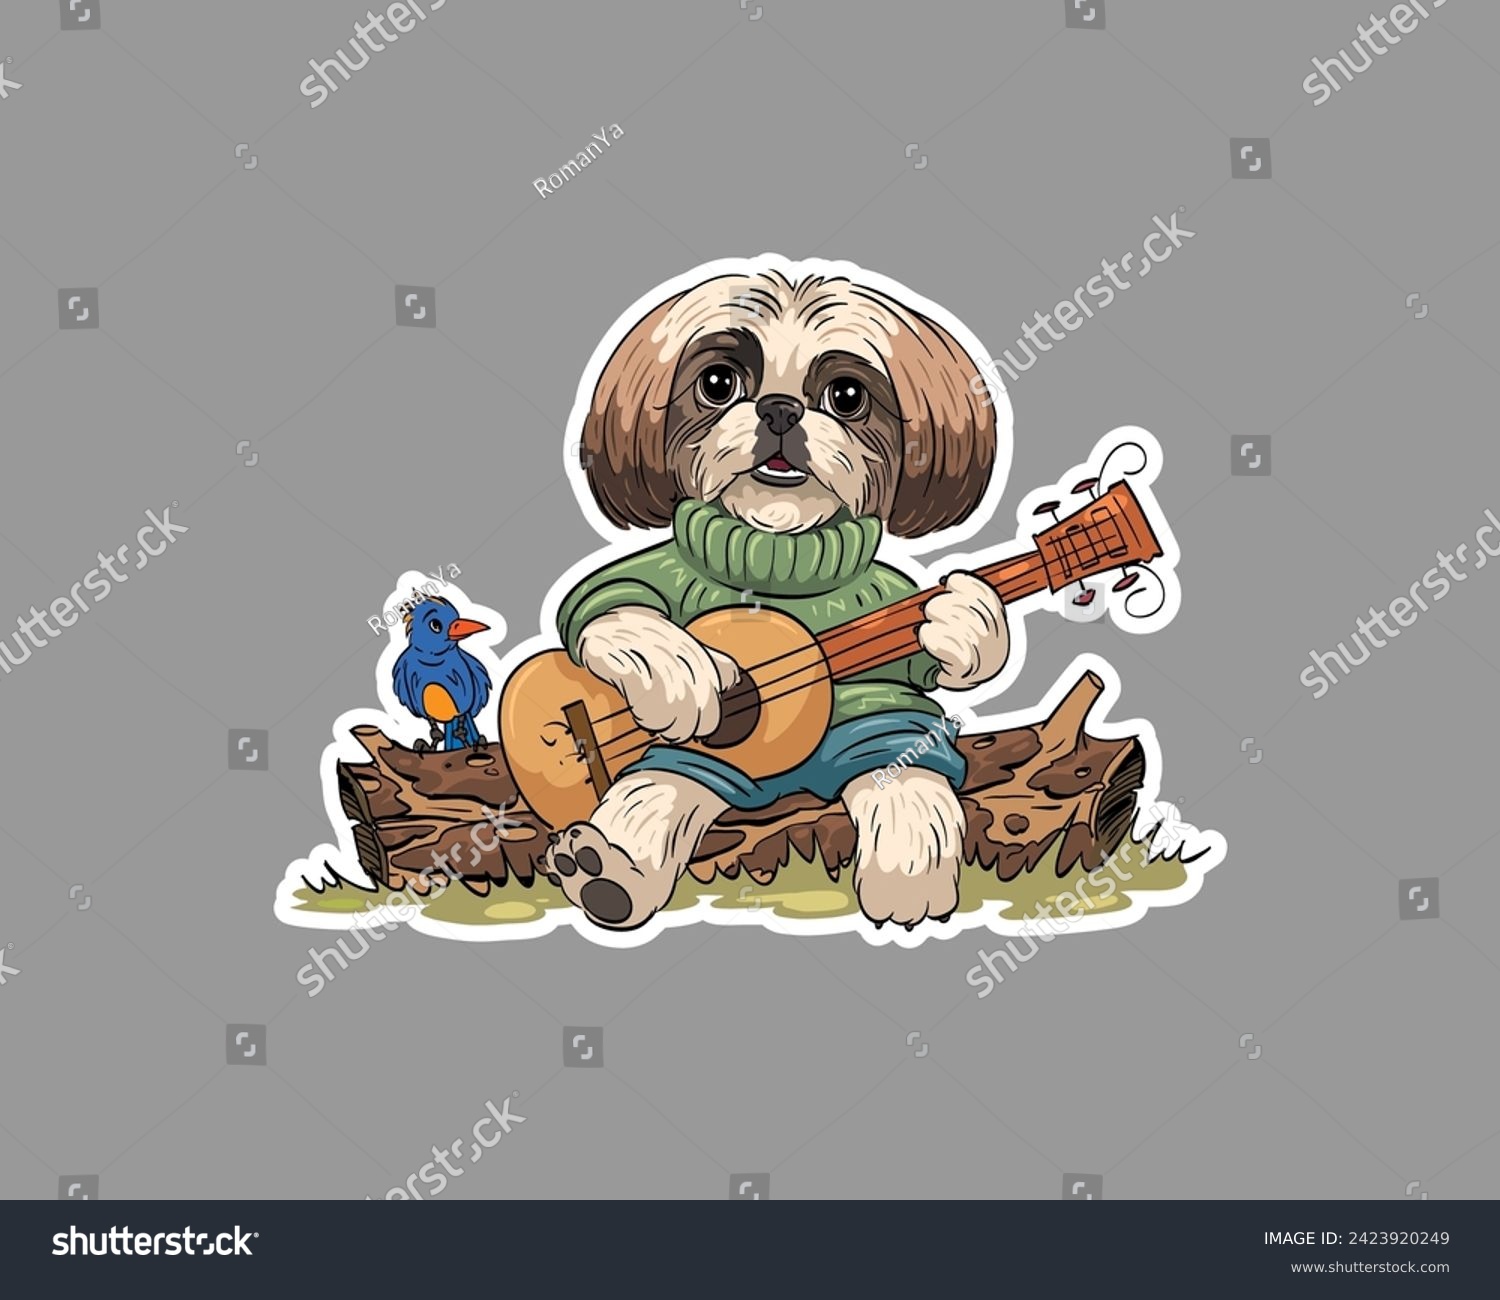 SVG of Shih tzu breed dog sits on a stump plays the guitar. Sticker style. Cute puppy portrait. Hand drawn vector illustration.  svg